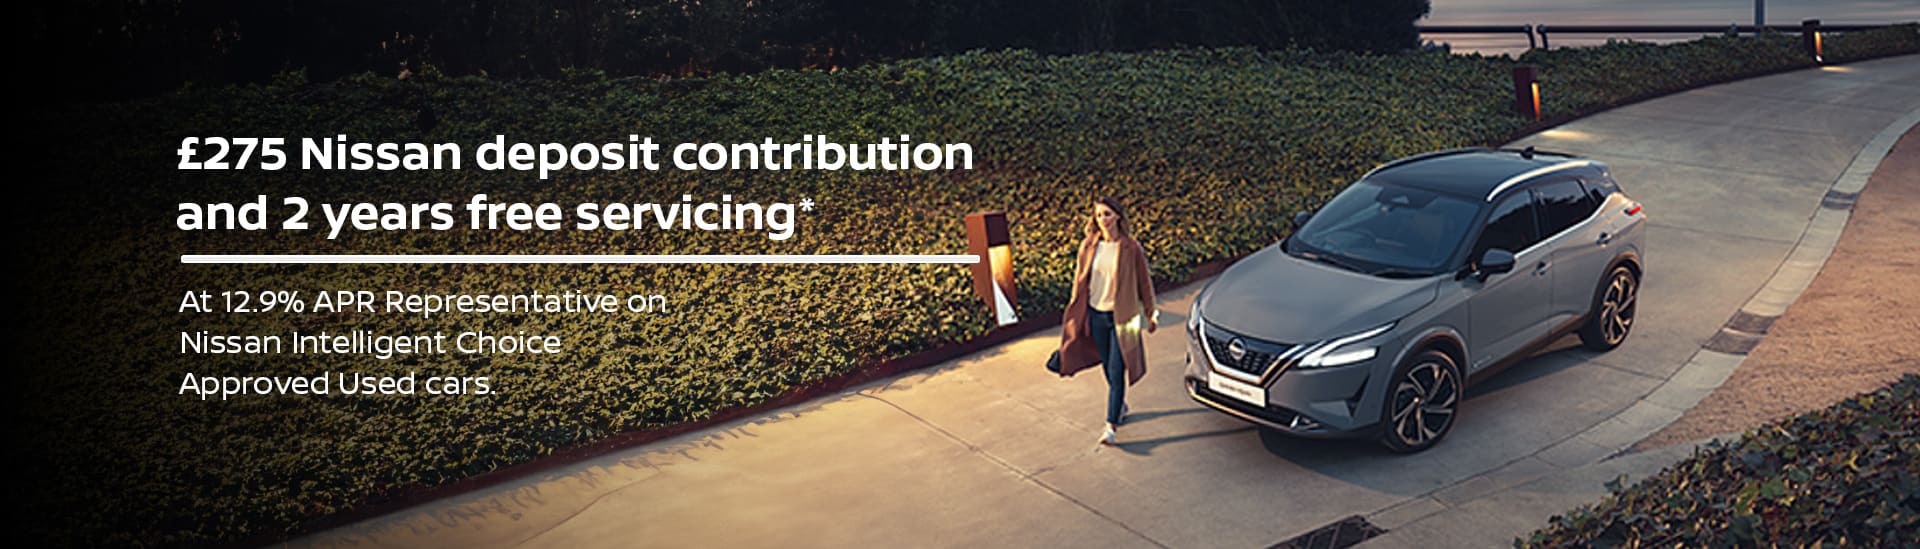 £275 Nissan deposit contribution and 2 years free servicing*